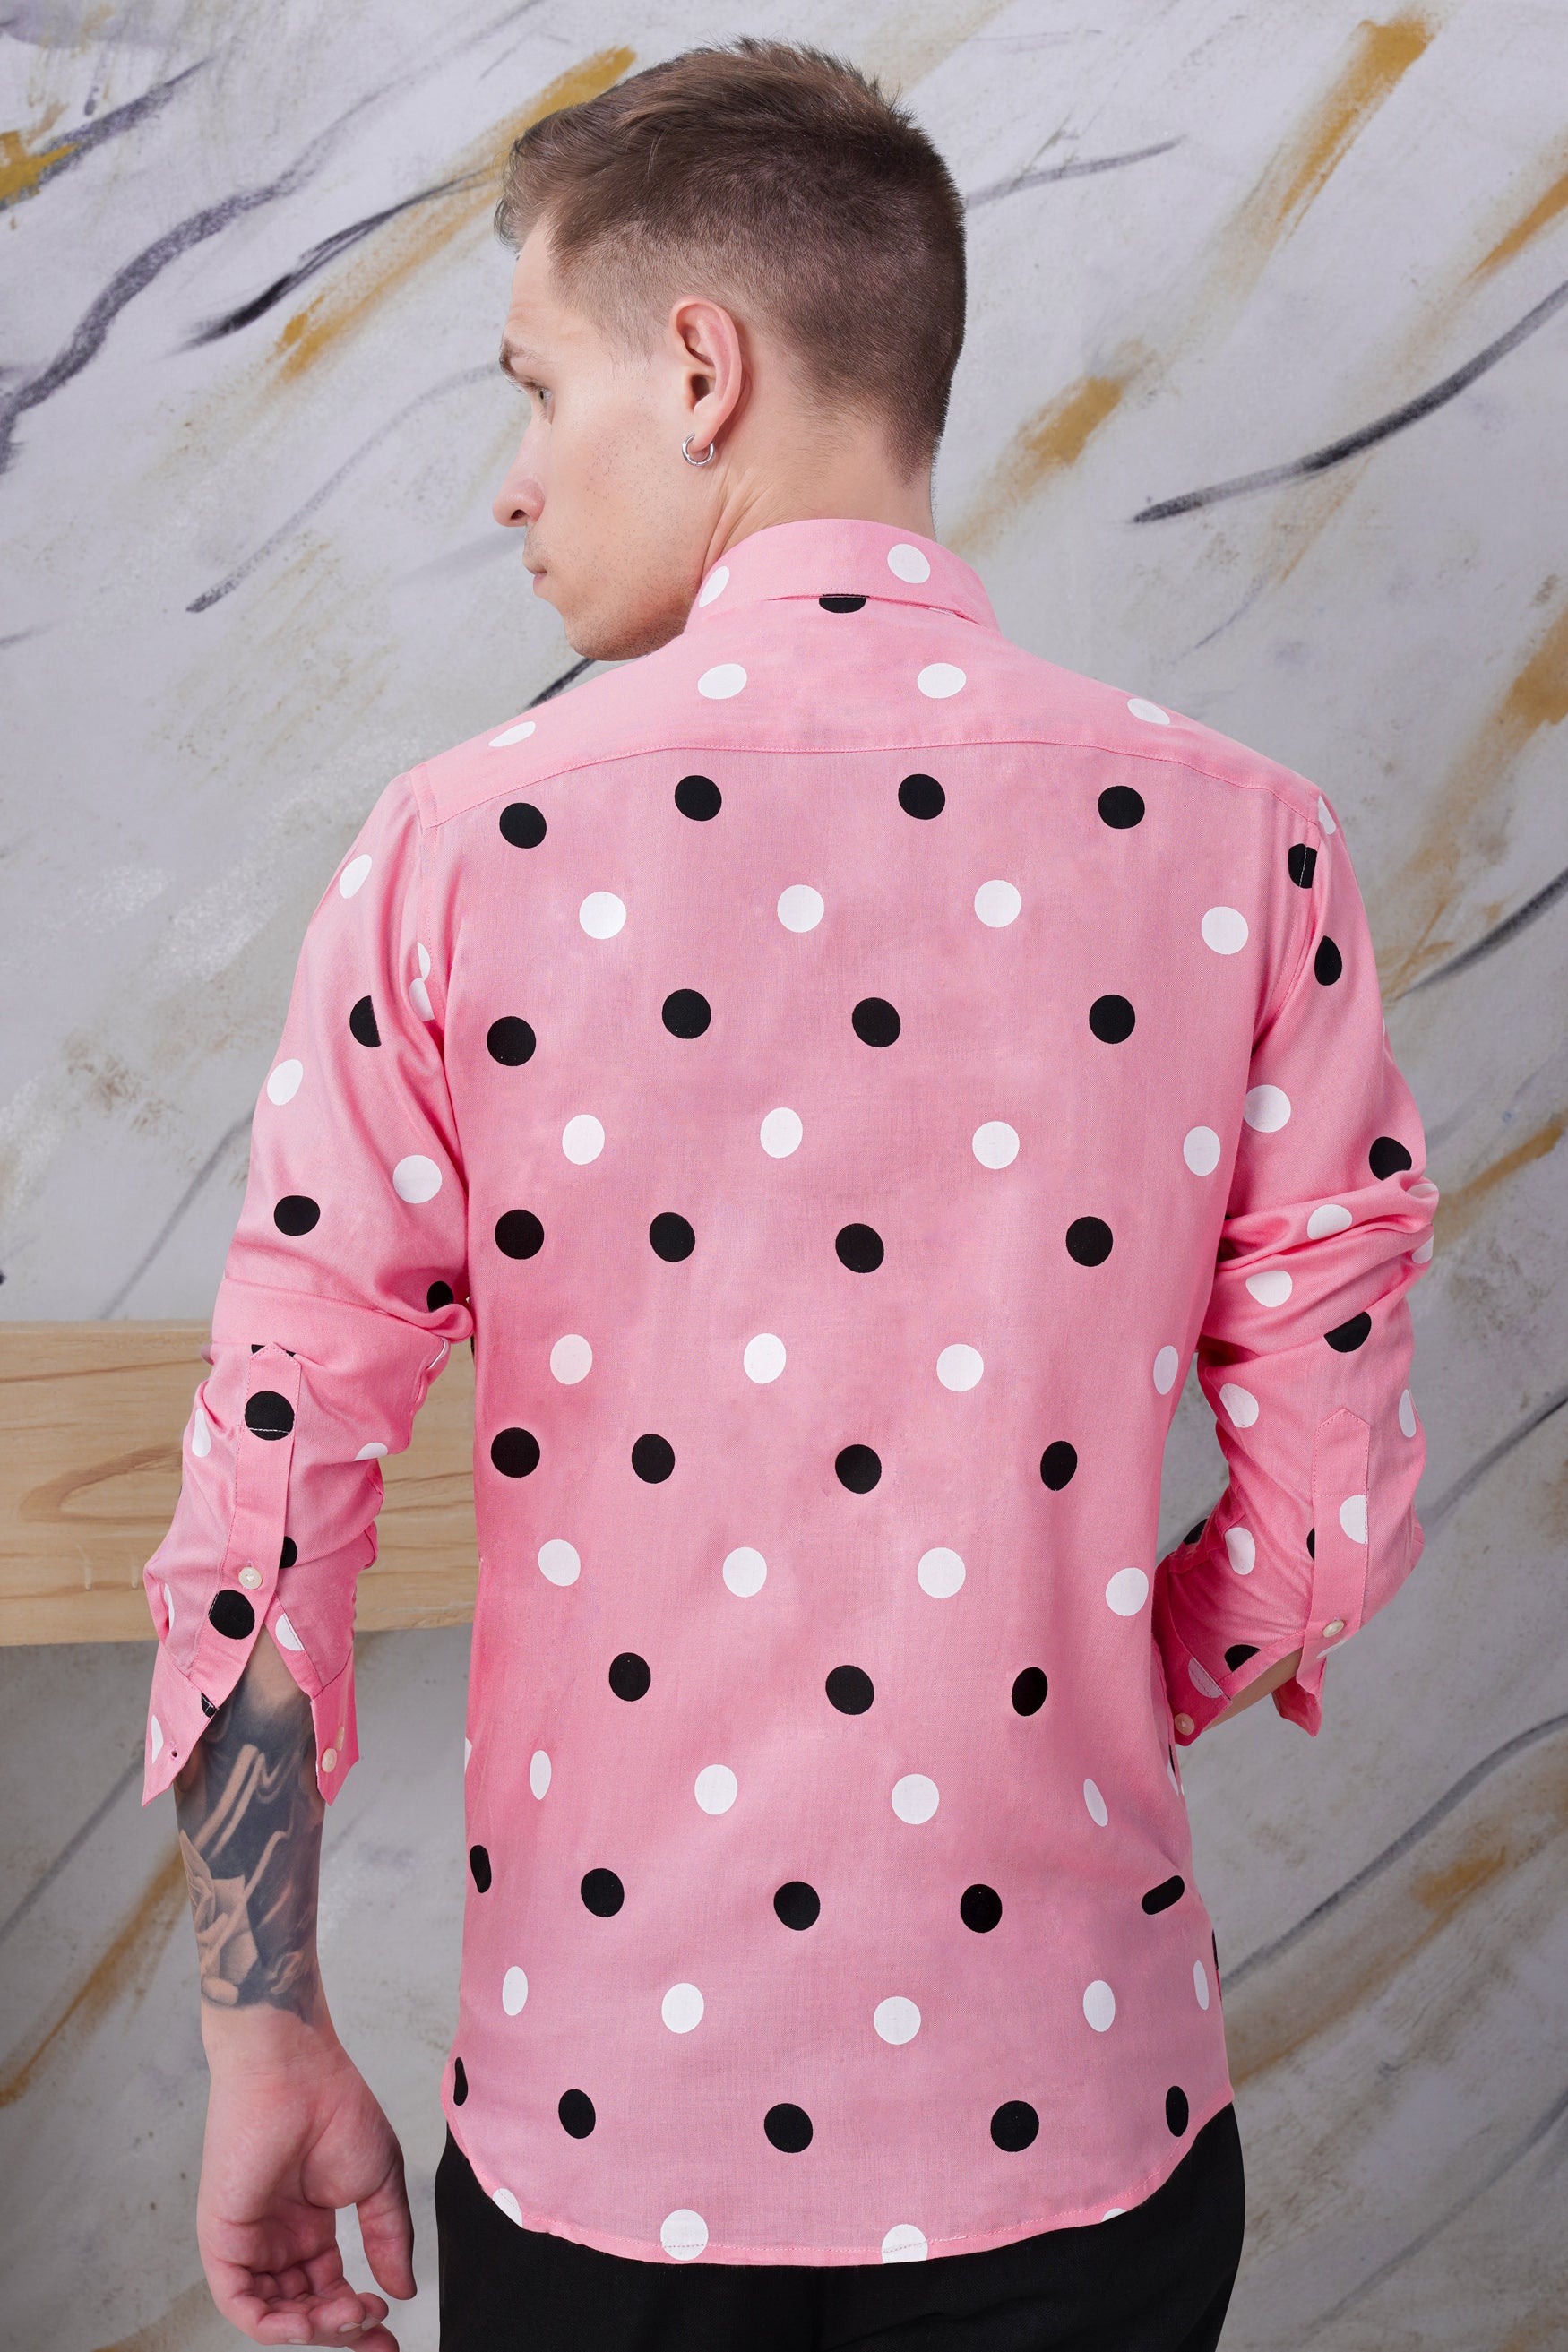 Cadillac Pink with Black and White Polka-Dotted Premium Tencel Shirt 11674-P433-38, 11674-P433-H-38, 11674-P433-39, 11674-P433-H-39, 11674-P433-40, 11674-P433-H-40, 11674-P433-42, 11674-P433-H-42, 11674-P433-44, 11674-P433-H-44, 11674-P433-46, 11674-P433-H-46, 11674-P433-48, 11674-P433-H-48, 11674-P433-50, 11674-P433-H-50, 11674-P433-52, 11674-P433-H-52